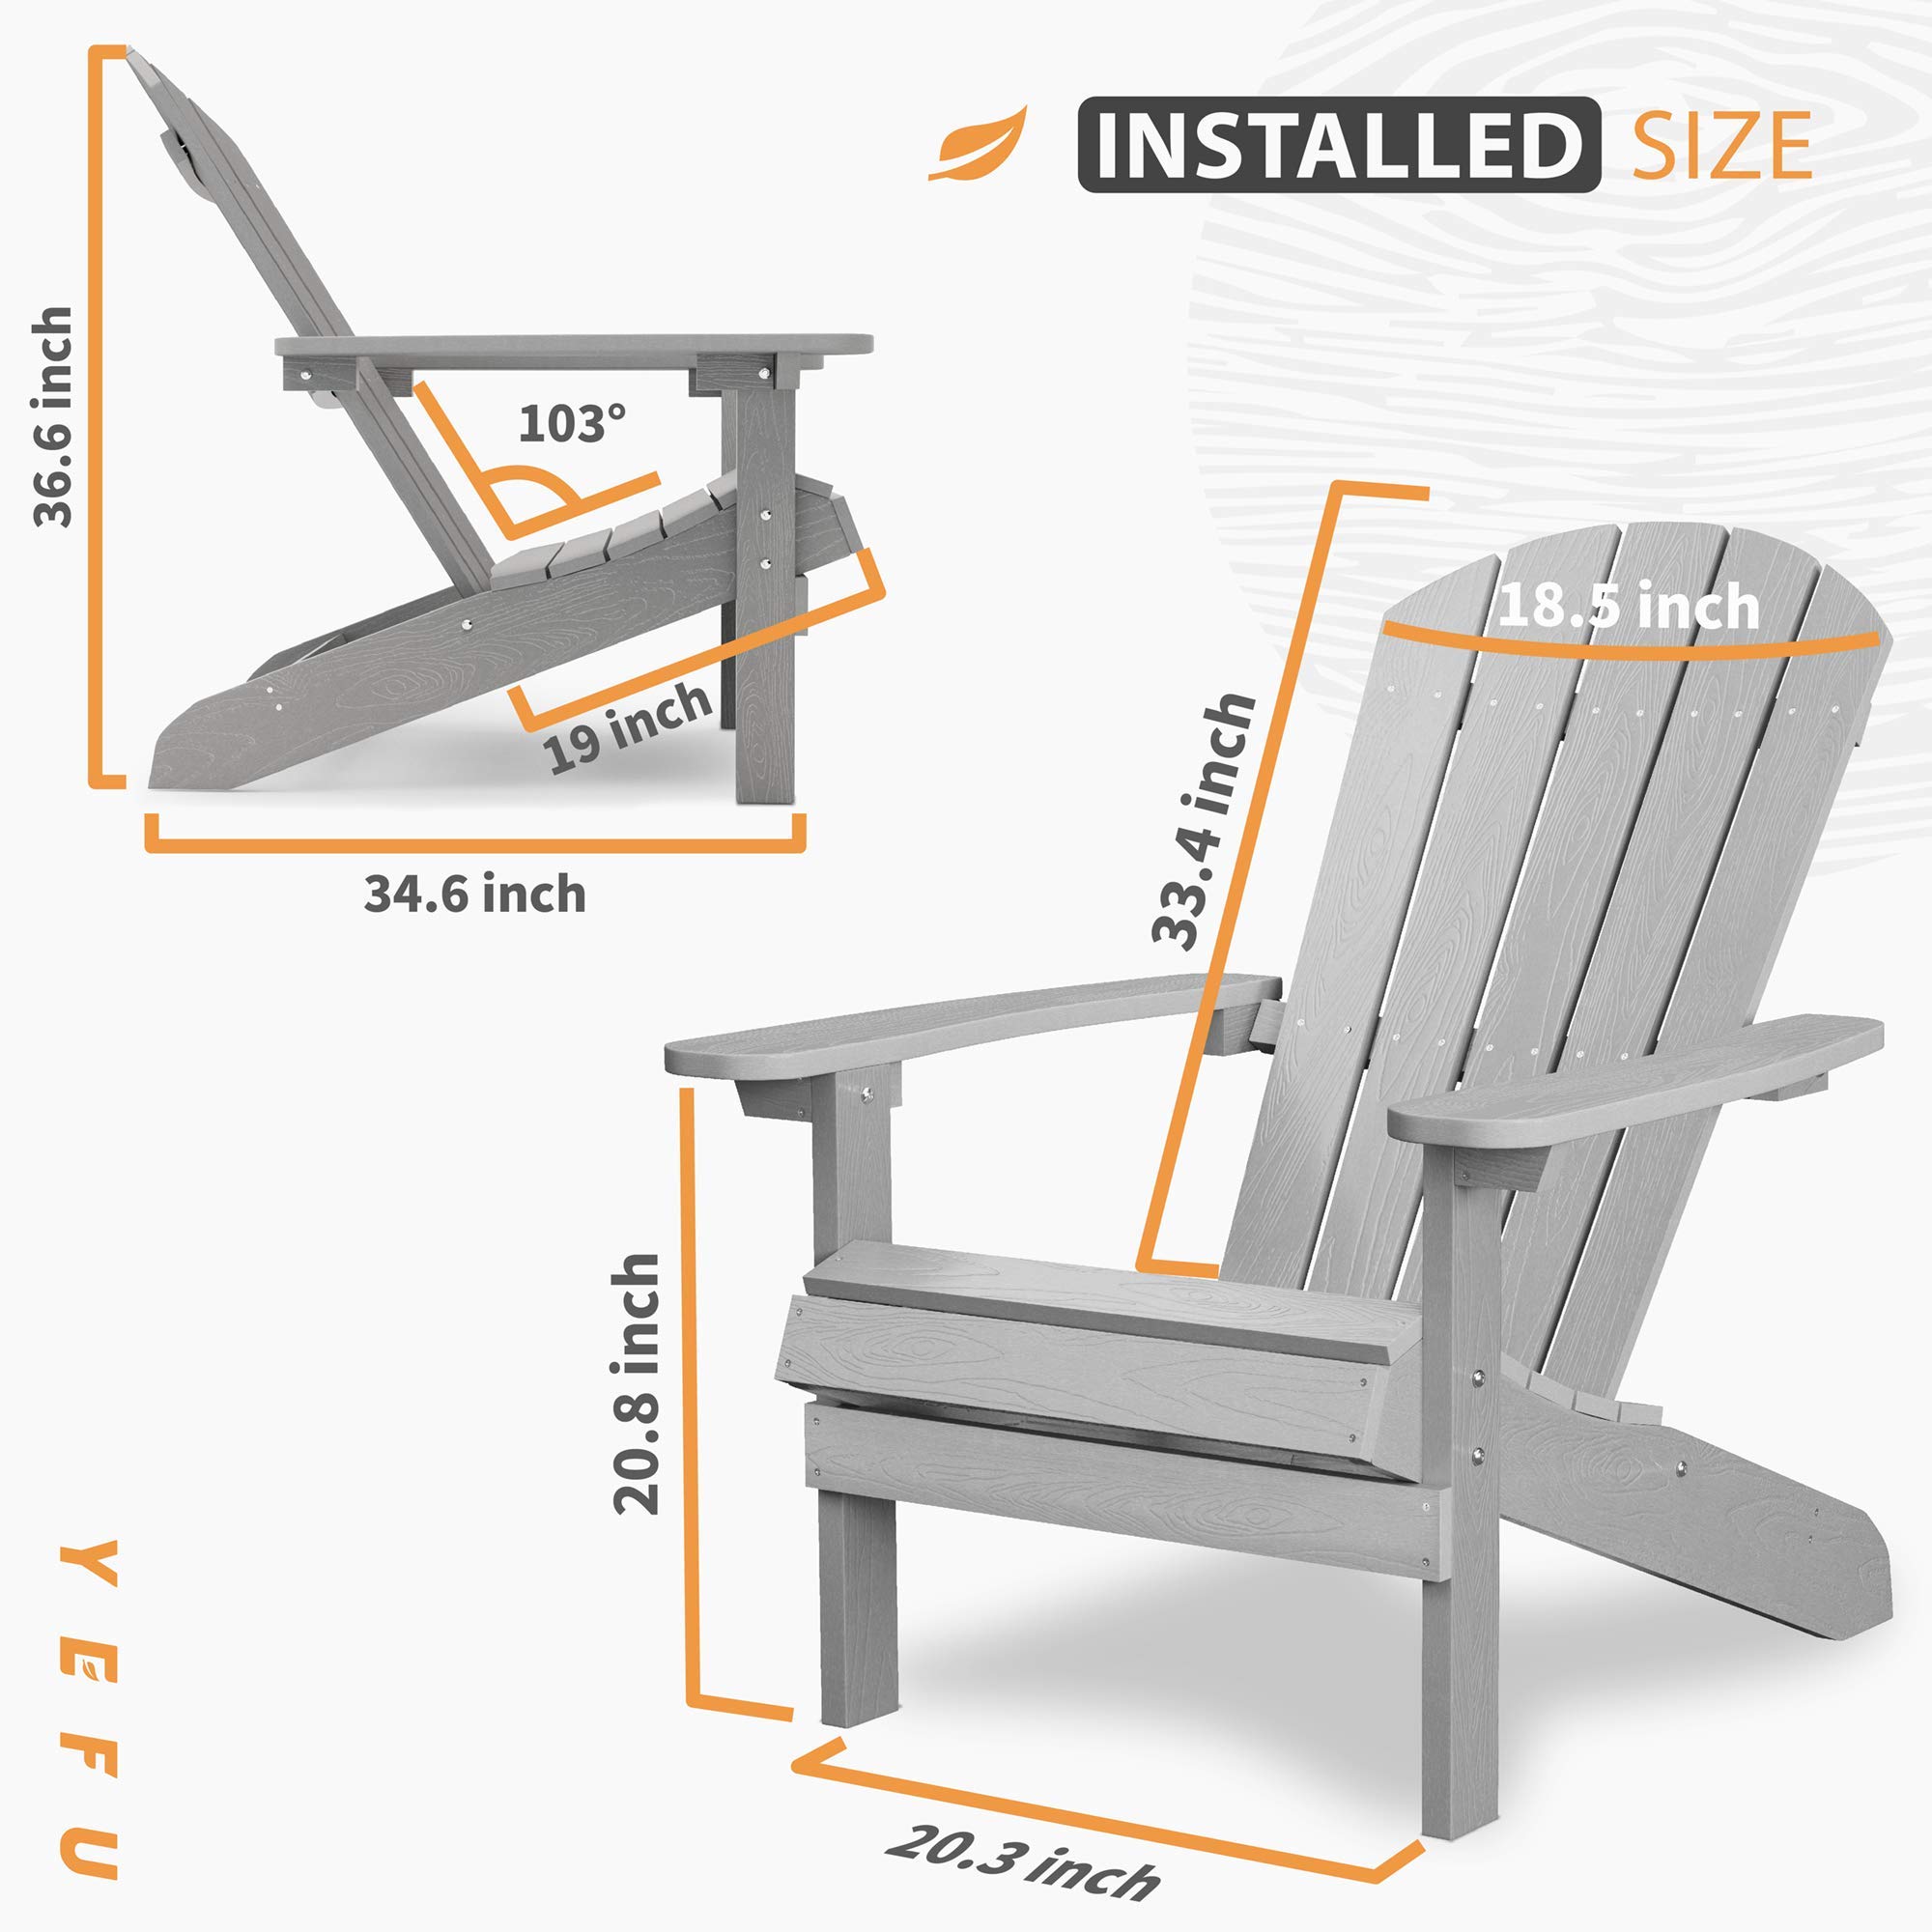 YEFU Adirondack Chair Plastic Weather Resistant, Patio Chairs, Widely Used in Outdoor, Fire Pit, Outside, Garden, Campfire Chairs (Grey)